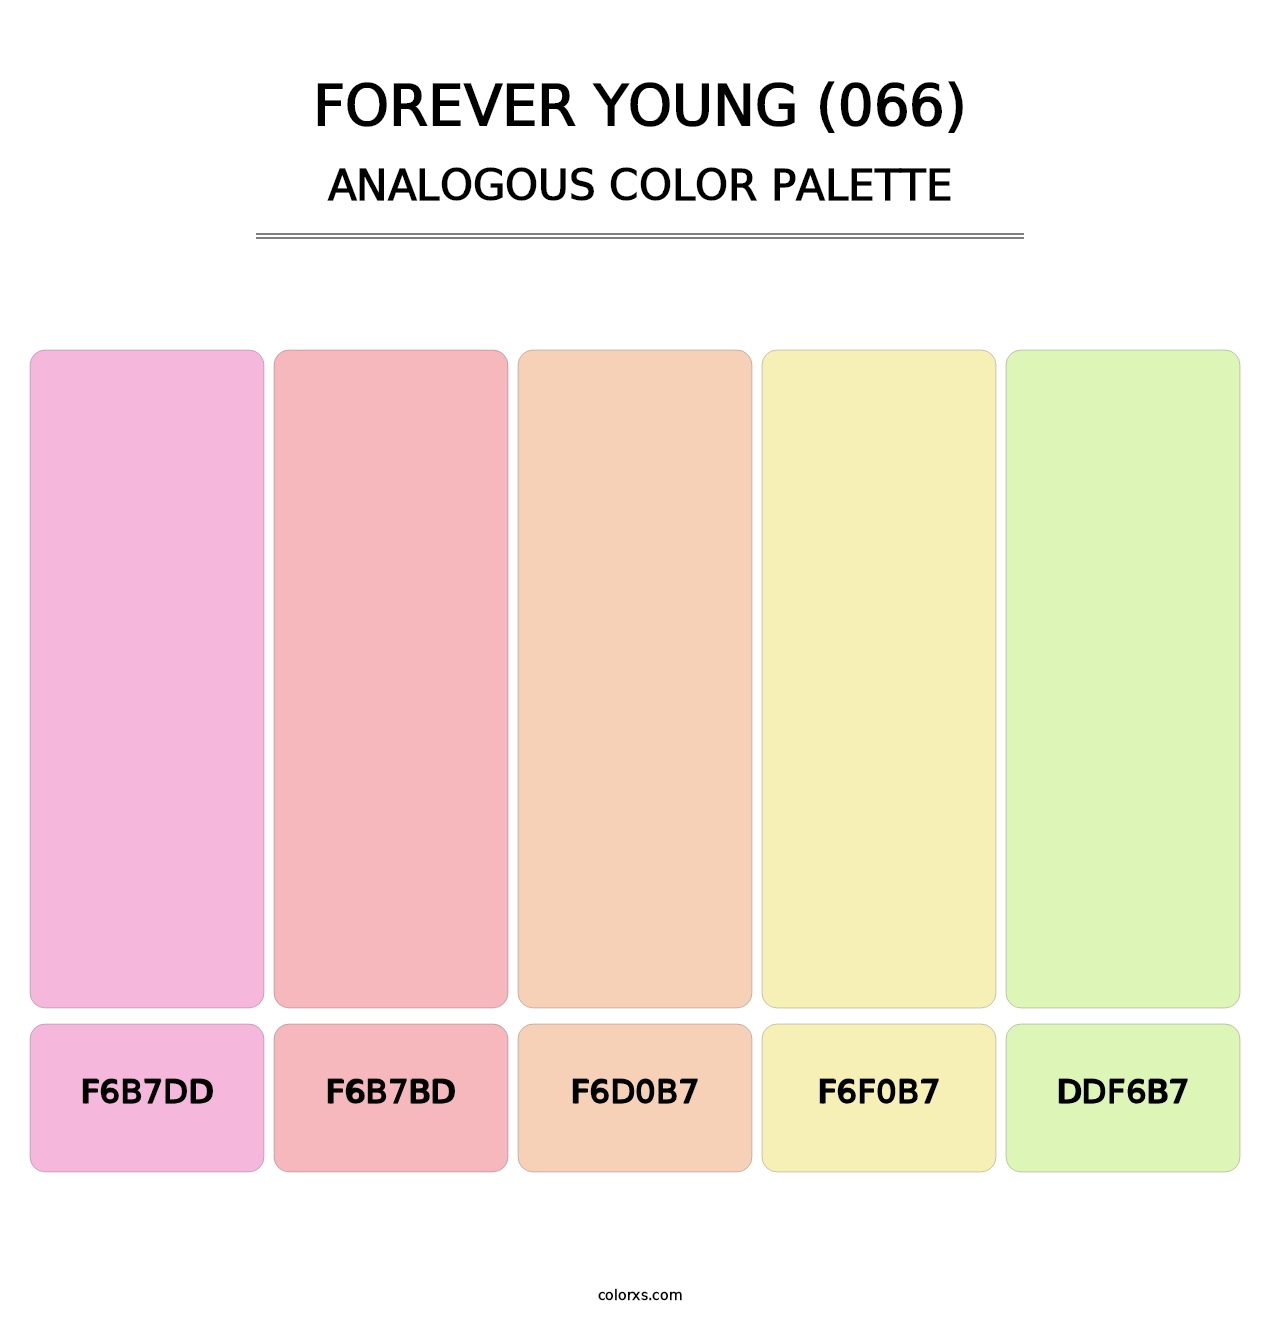 Forever Young (066) - Analogous Color Palette